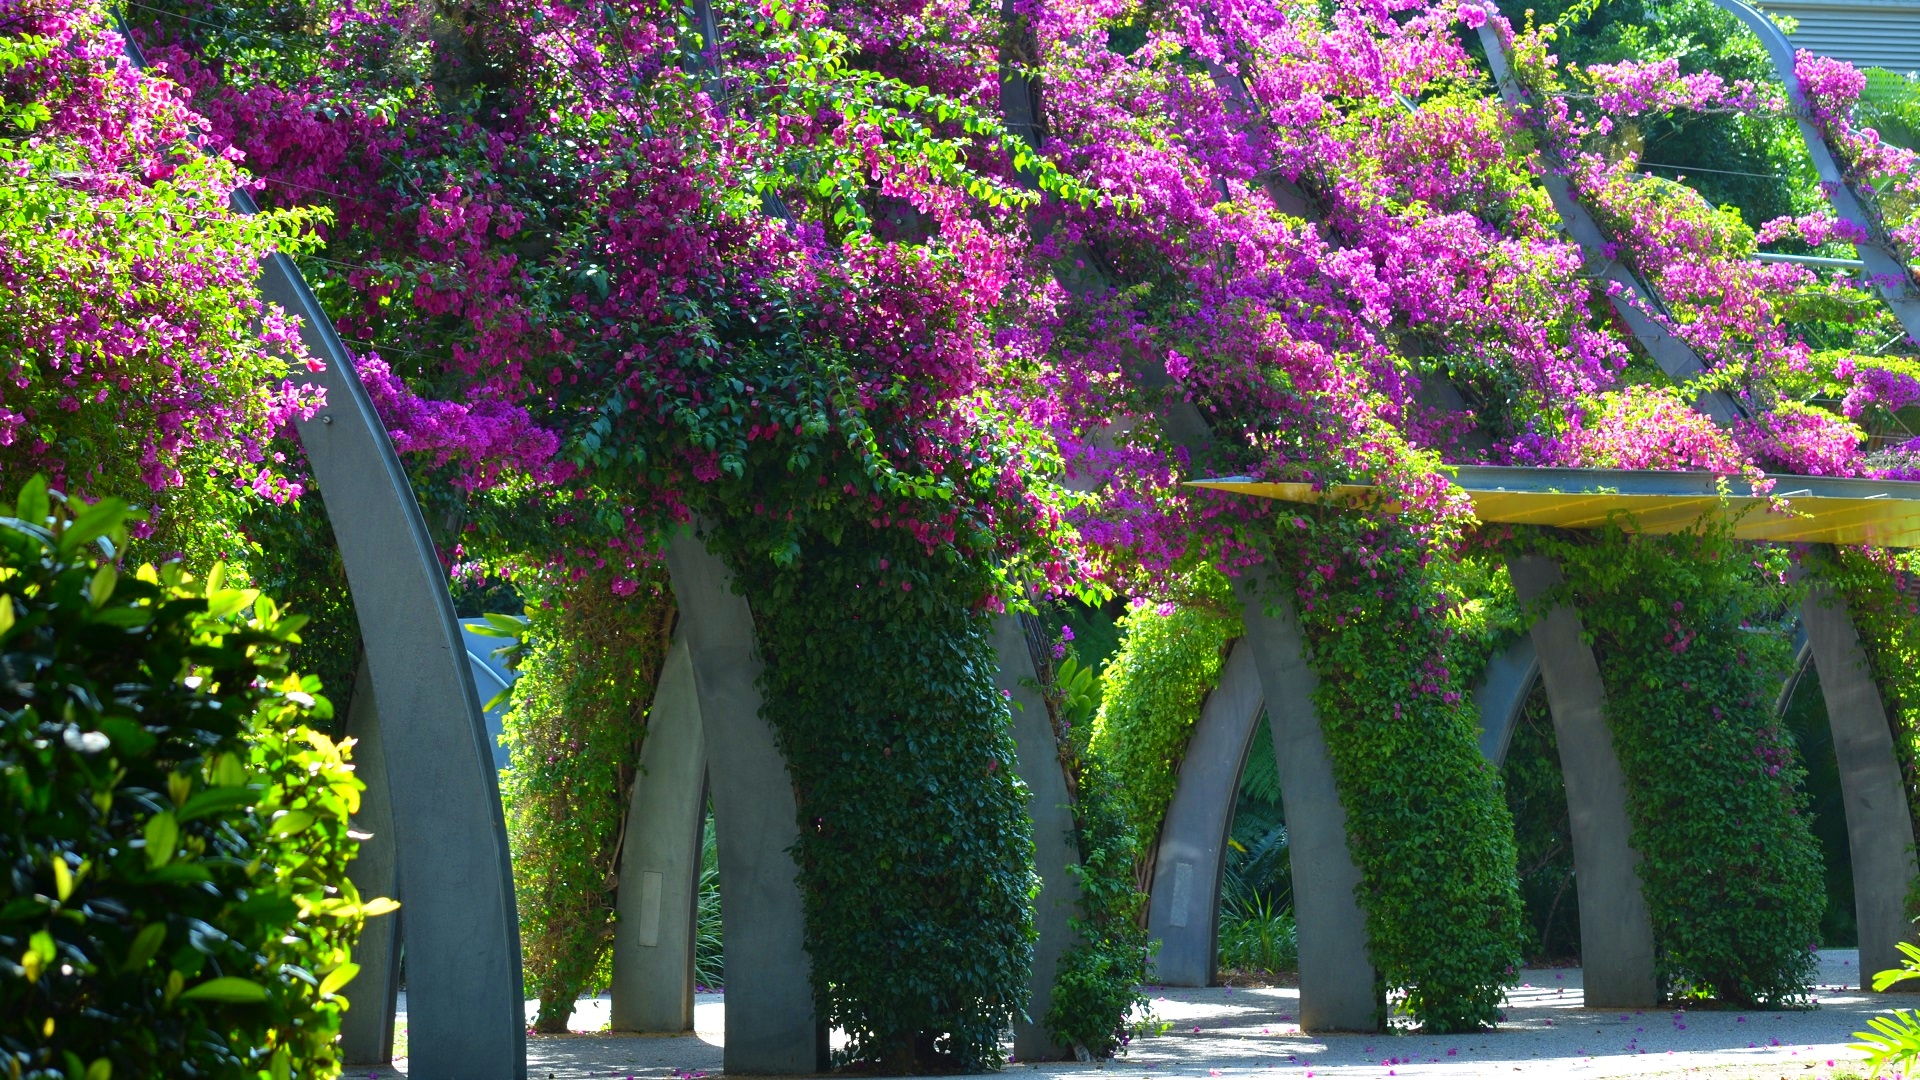 earth, bougainvillea, architecture, awning, brisbane, flower, grand arbour, leaf, photography, purple flower, vine, walkway, flowers QHD